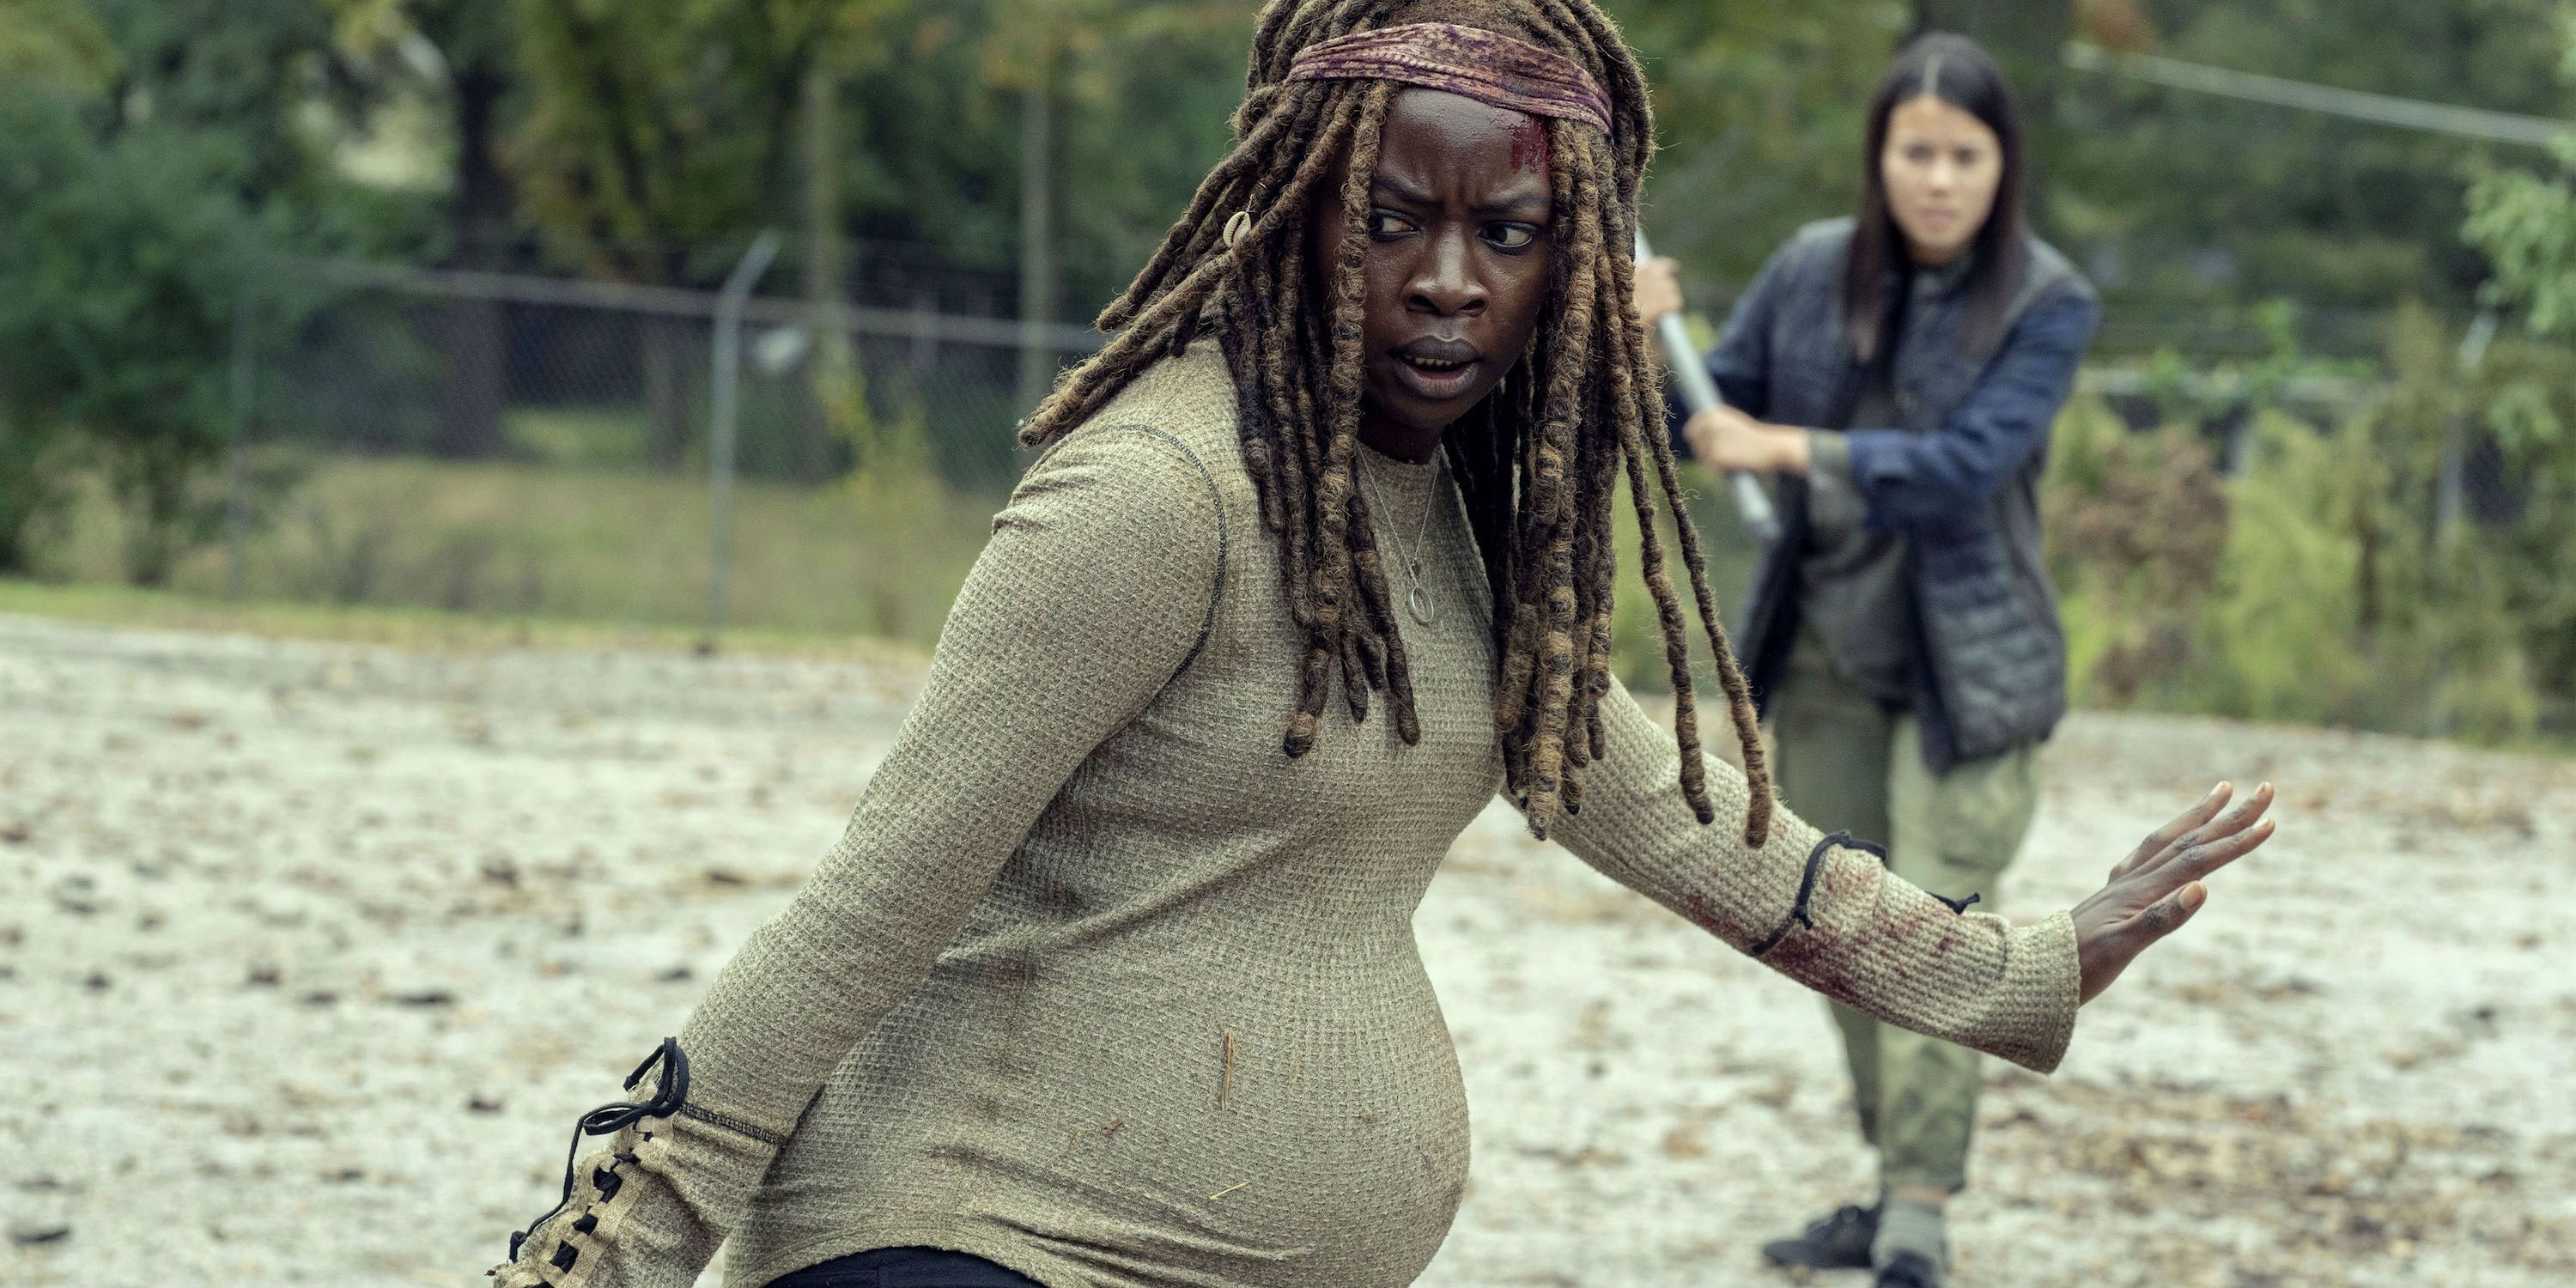 A pregnant Michonne prevents others from approaching in The Walking Dead